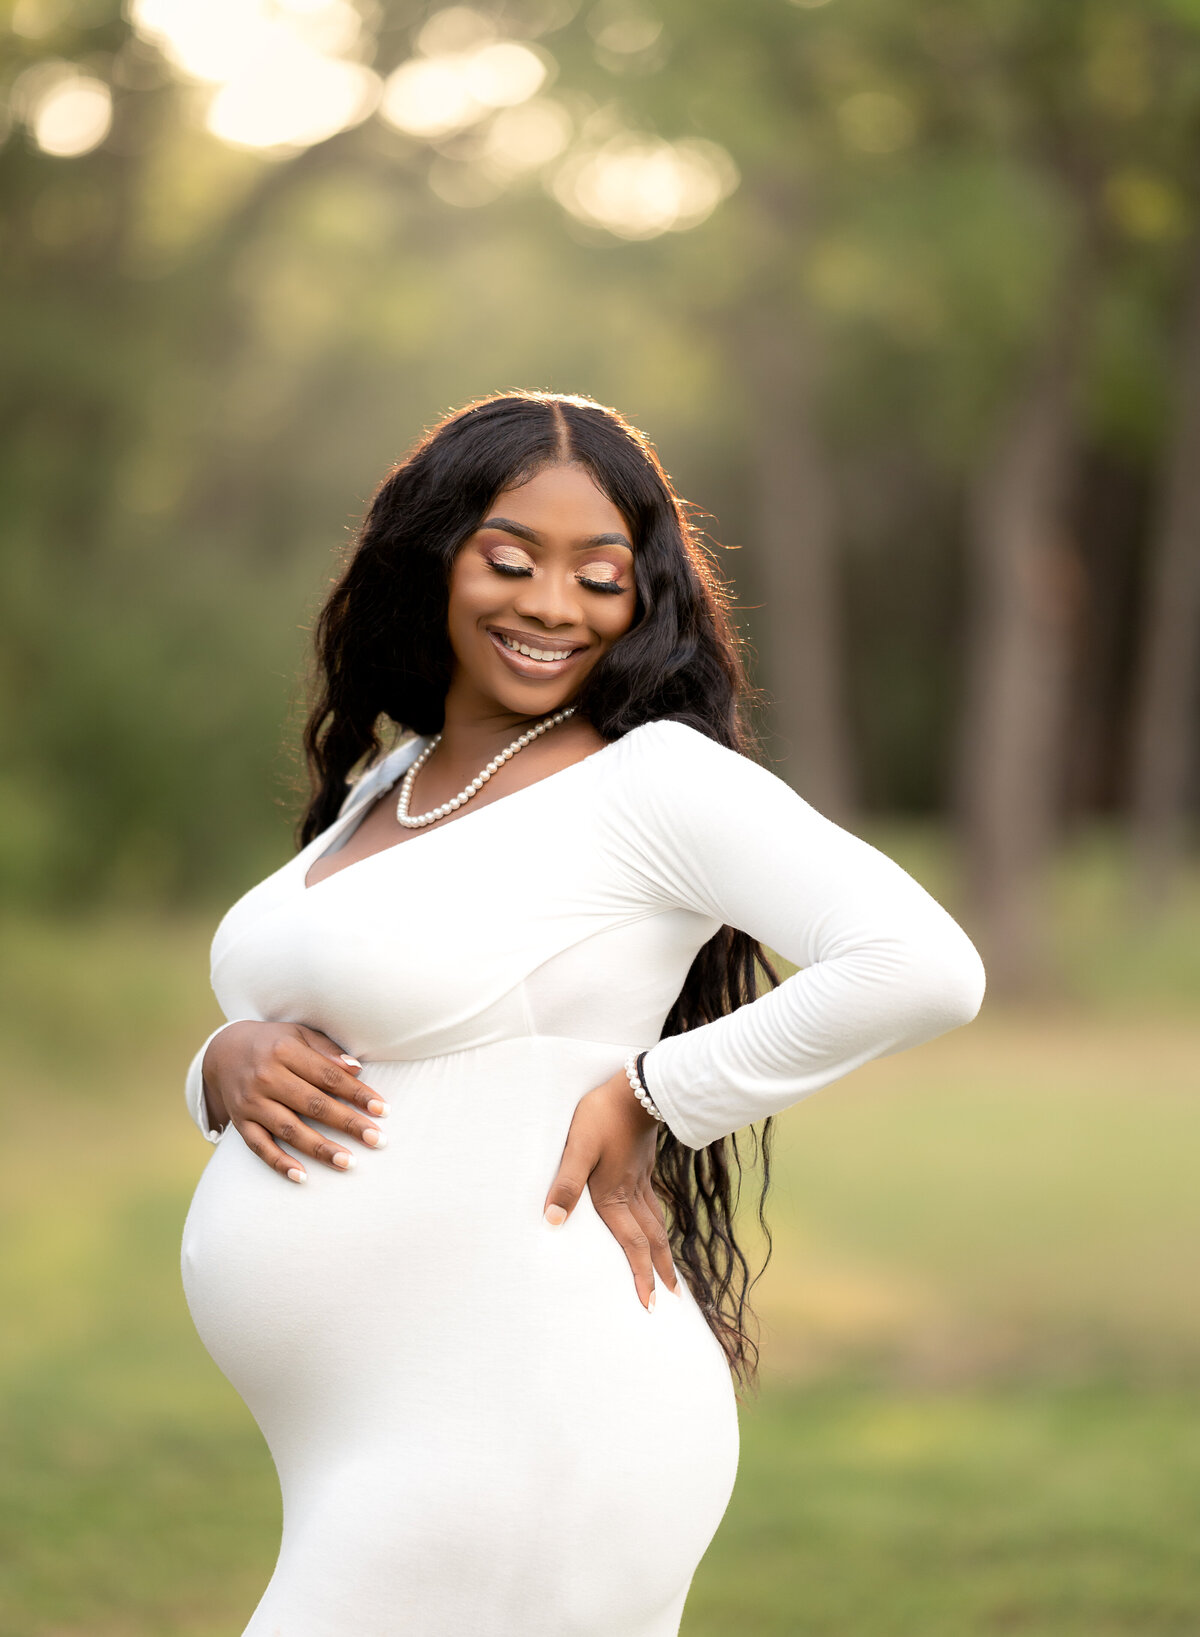 woman smiling while posing holding her pregnant belly in a white fitted dress